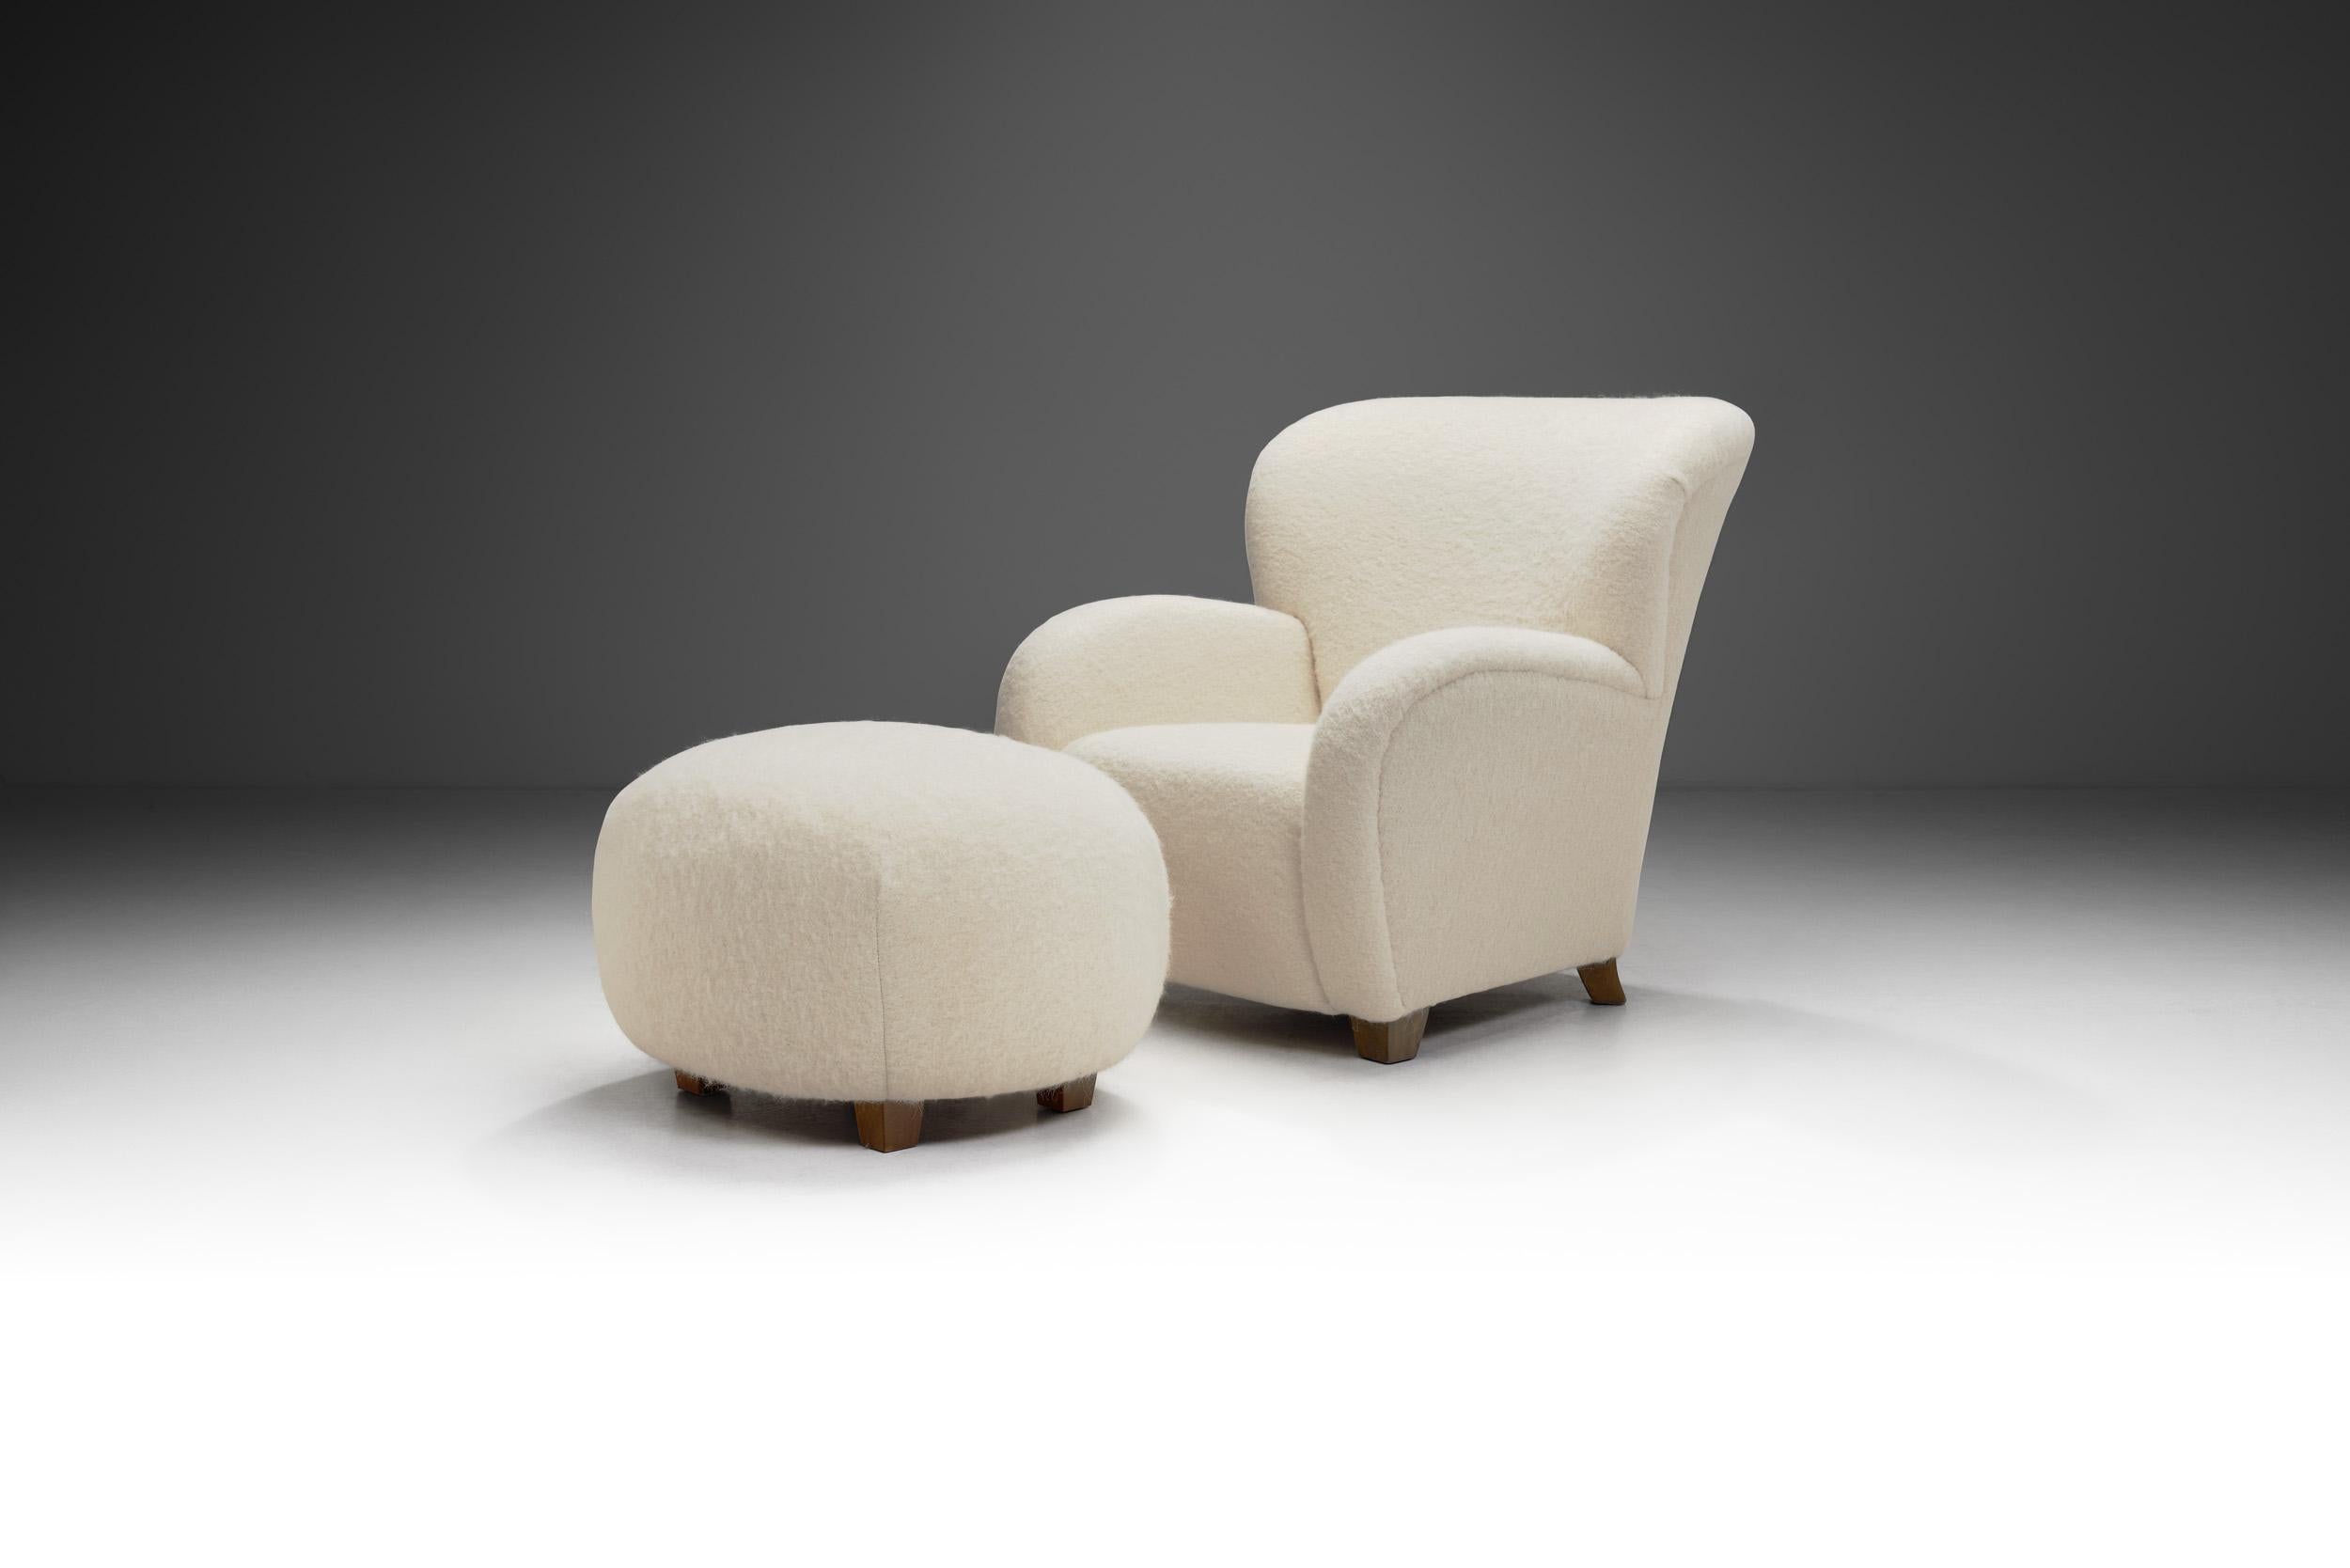 This pair of lounge chair and ottoman is an elegant and comfortable evidence of the mastery and artistry of the European cabinetmakers who defined mid-20th century modern seating. This duo is of the highest quality, both in terms of visual quality,